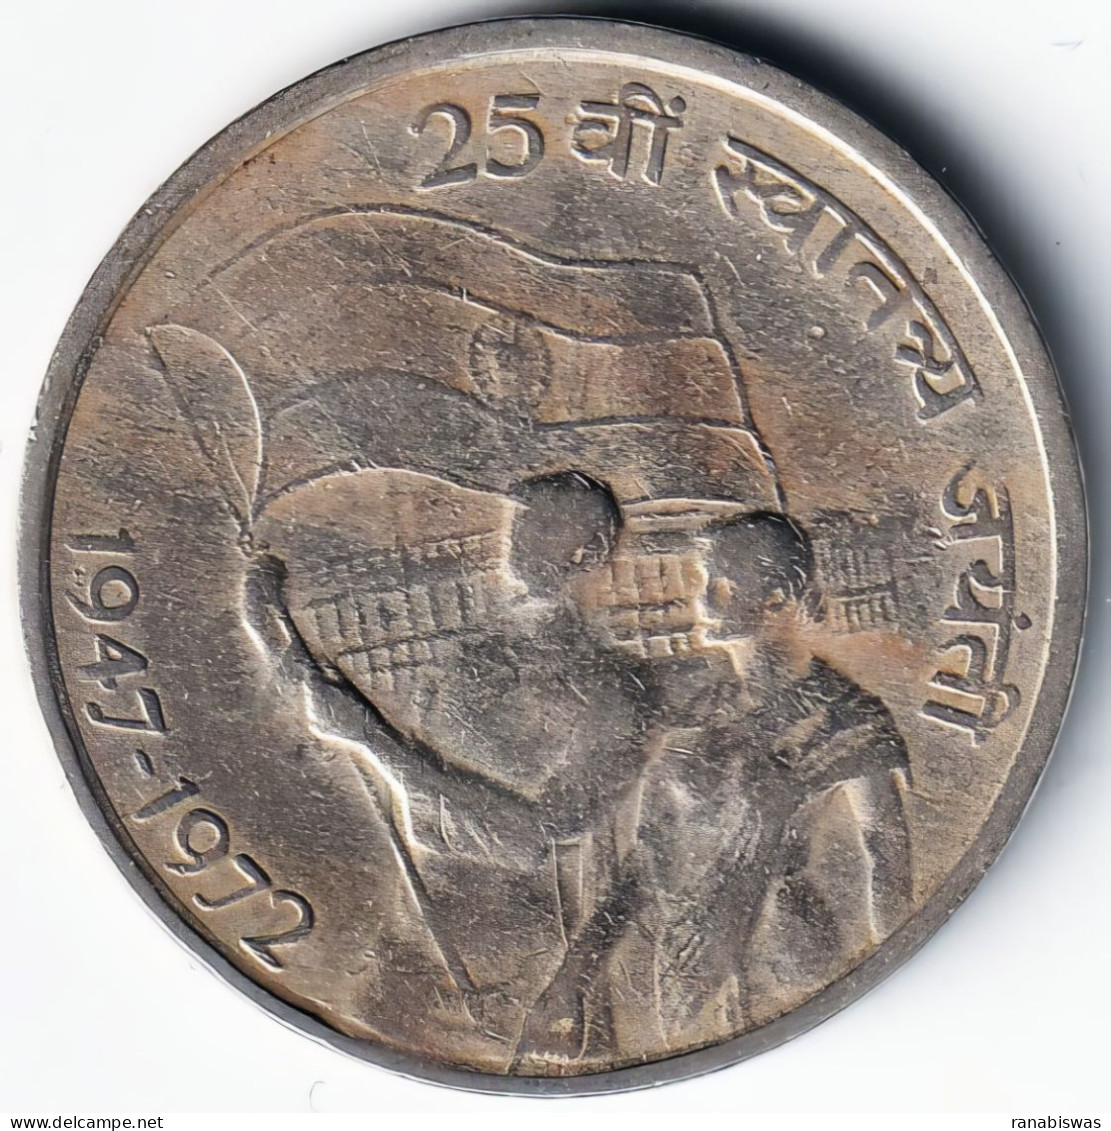 INDIA COIN LOT 102, 50 PAISE 1972, INDEPENDENCE, CALCITTA MINT, XF - India